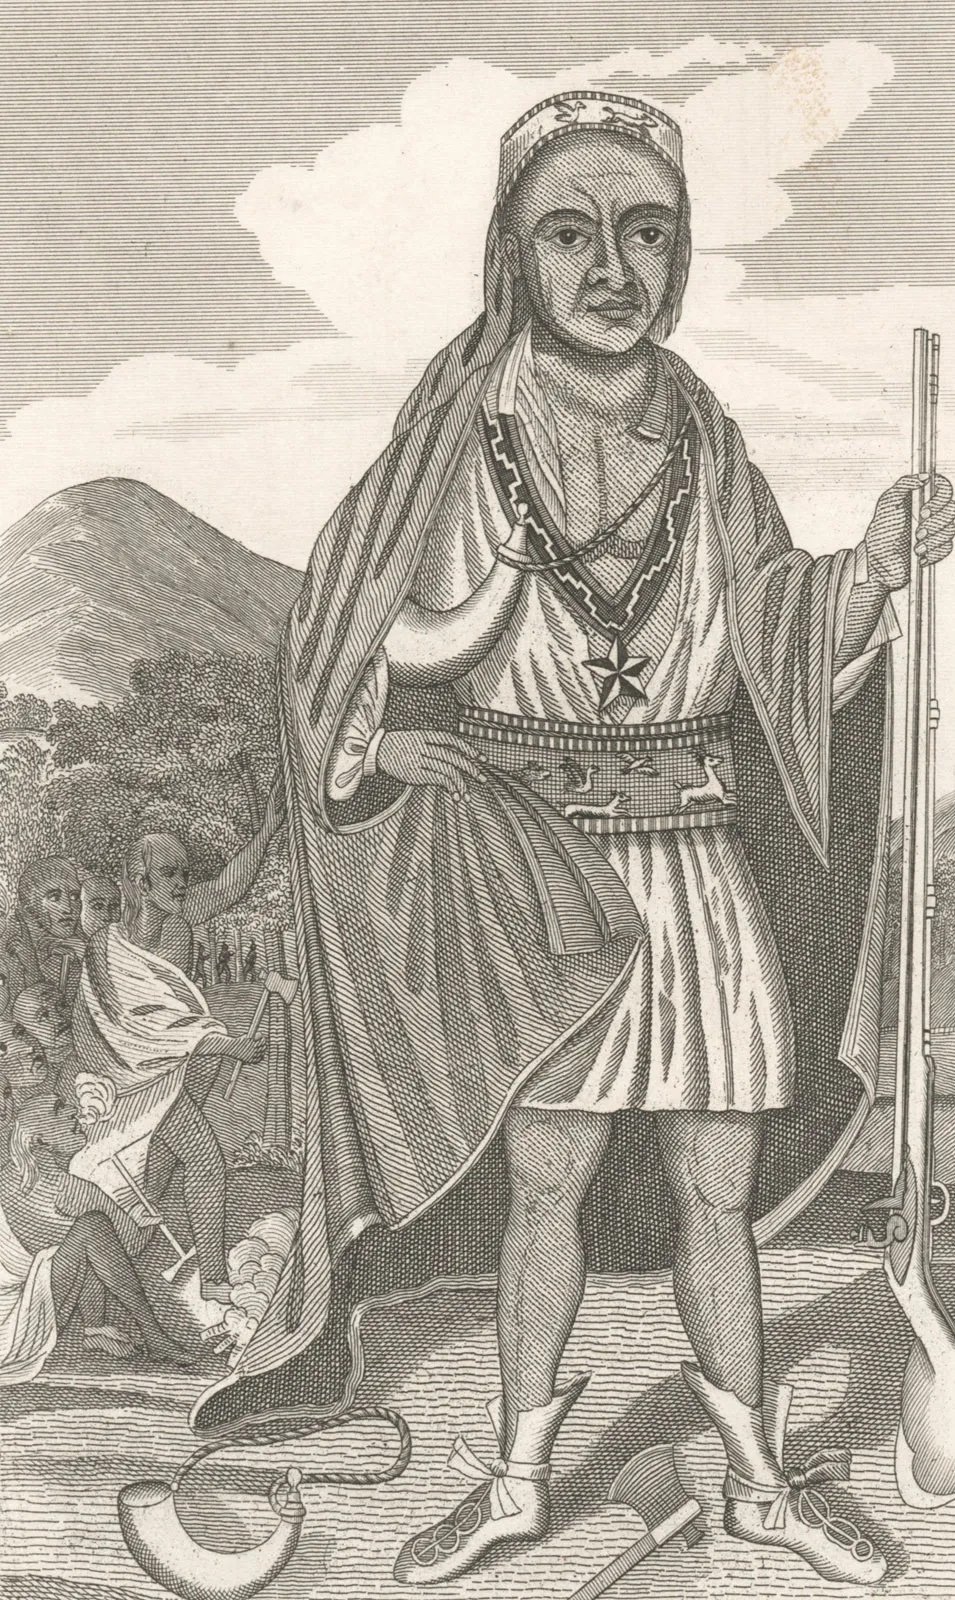 A romanticized depiction of Metacom, in front of Potumtuk or Mt. Hope, from a 19th-century engraving by Benson John Lossing